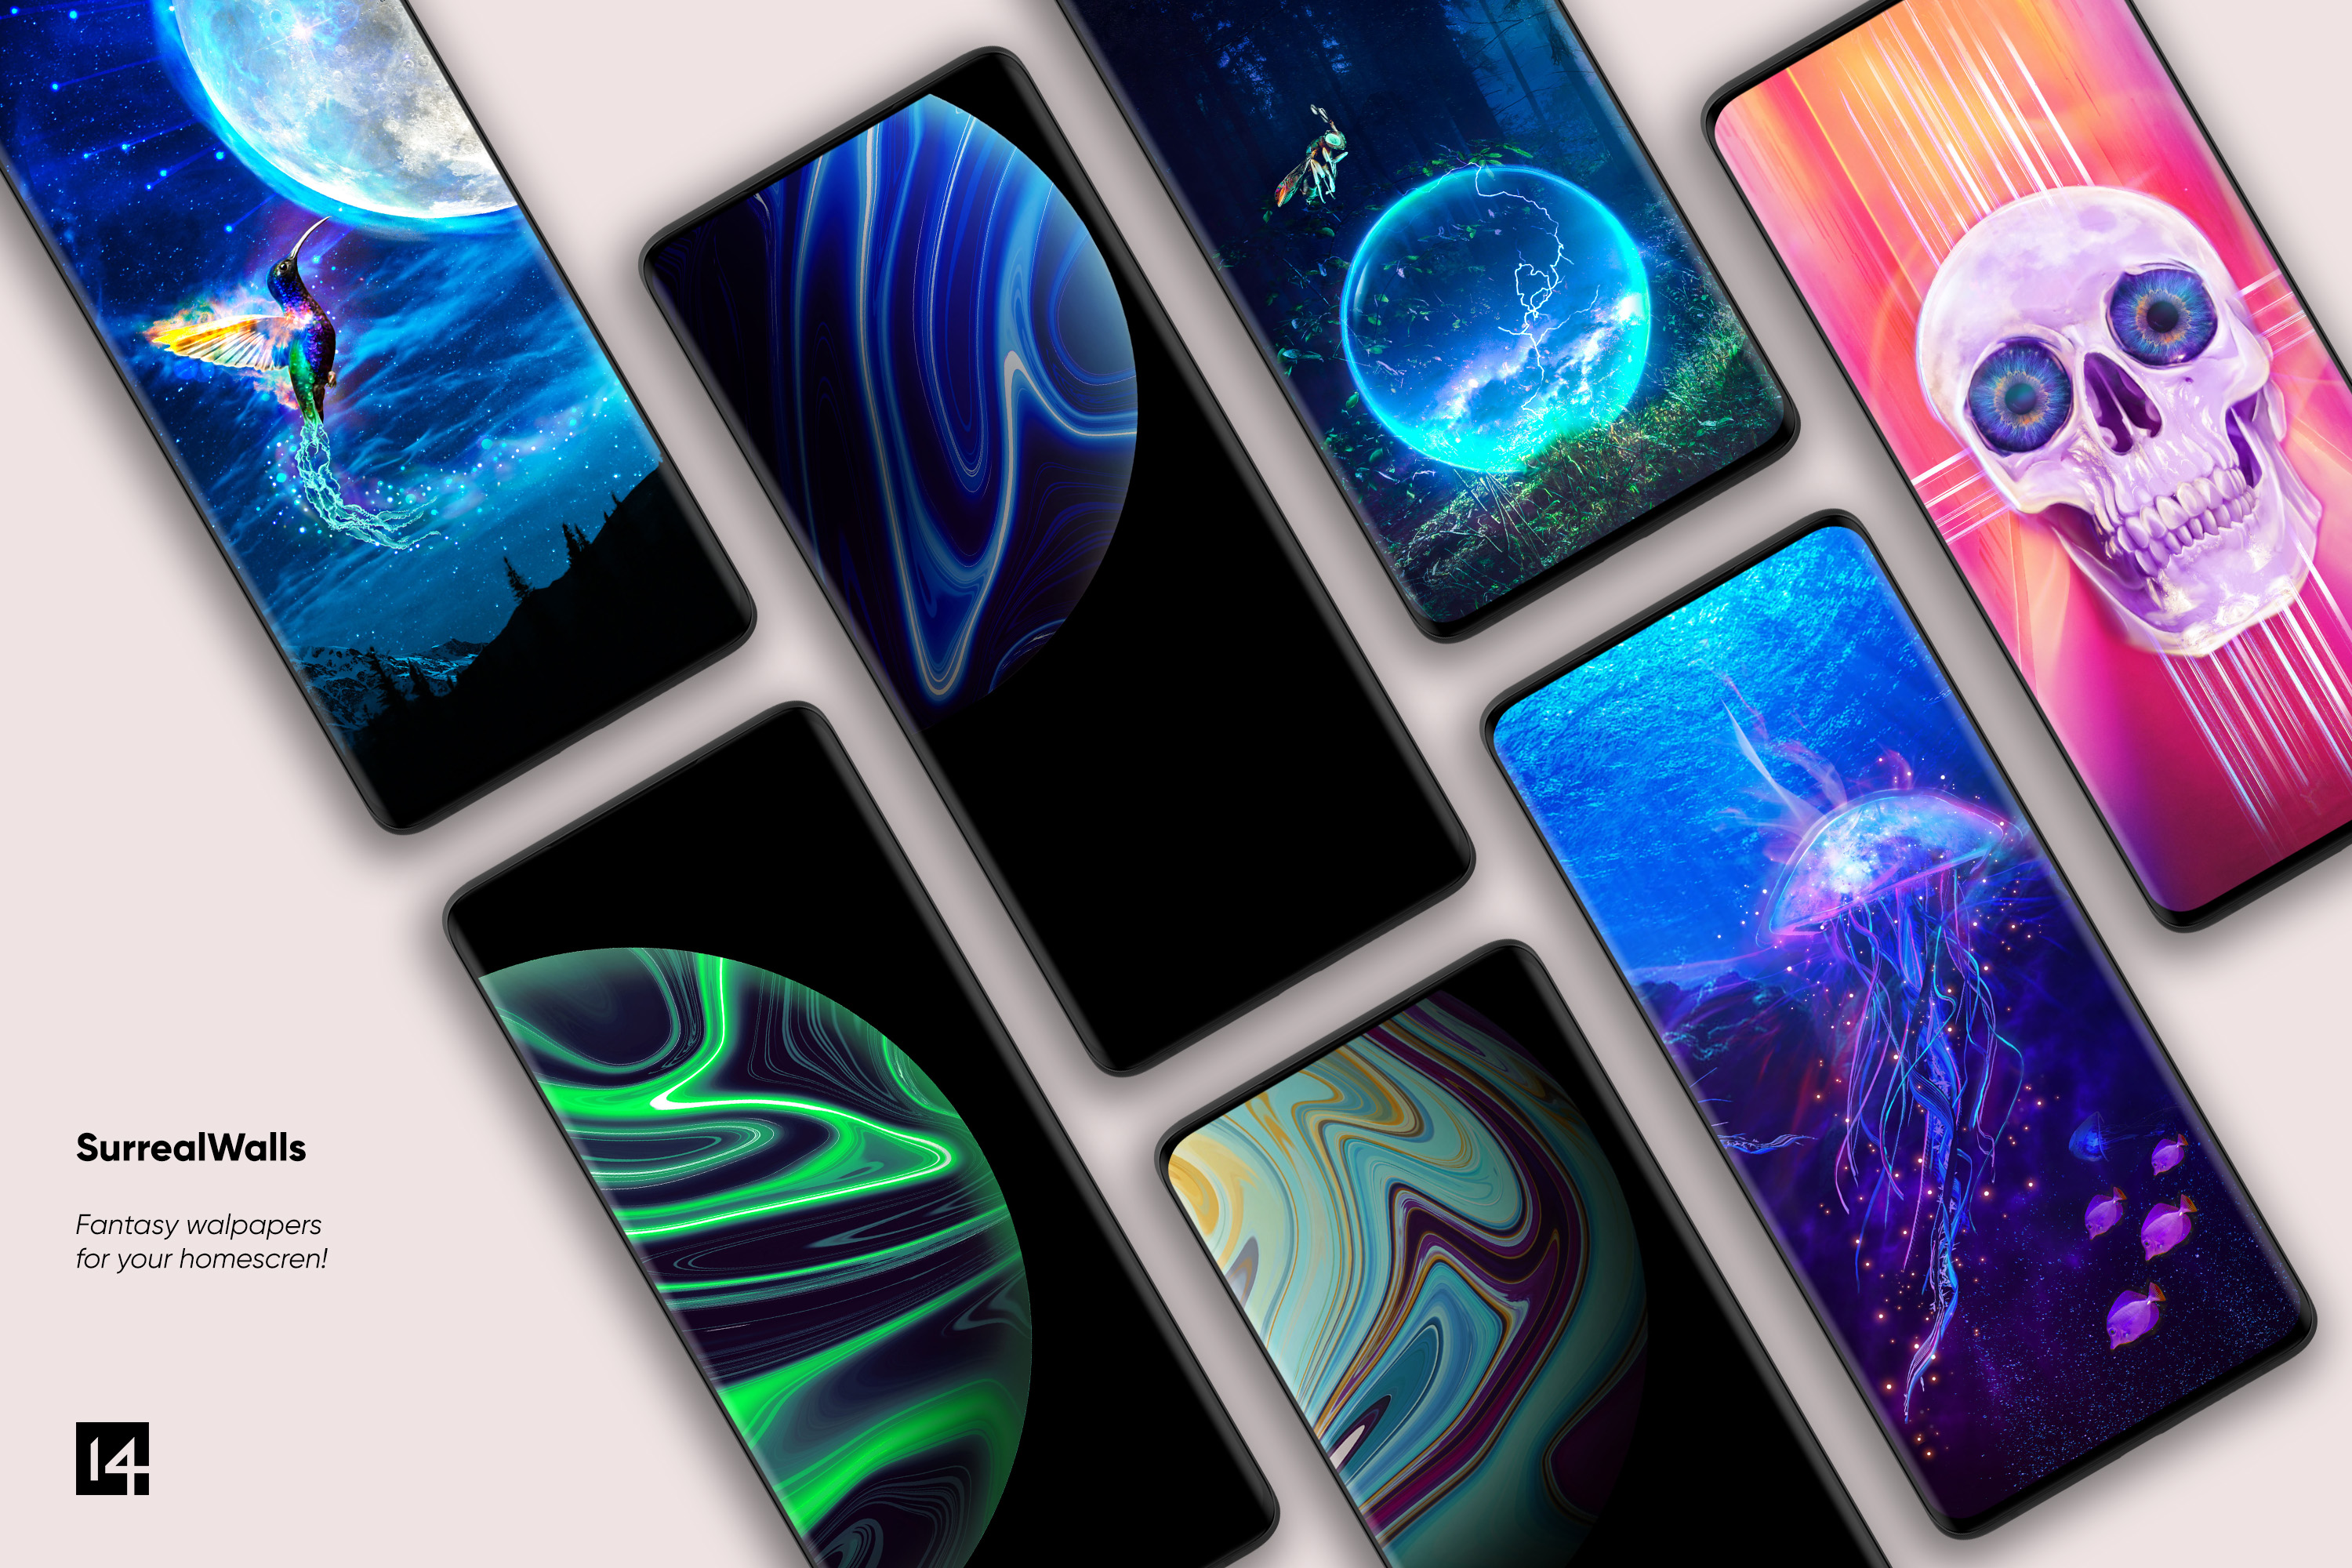 Onestudio on surrealwalls wallpaper app is live on google play static and live wallpapers with a lot more to e download here httpstcozlpdoigqj follow us like and retweet and